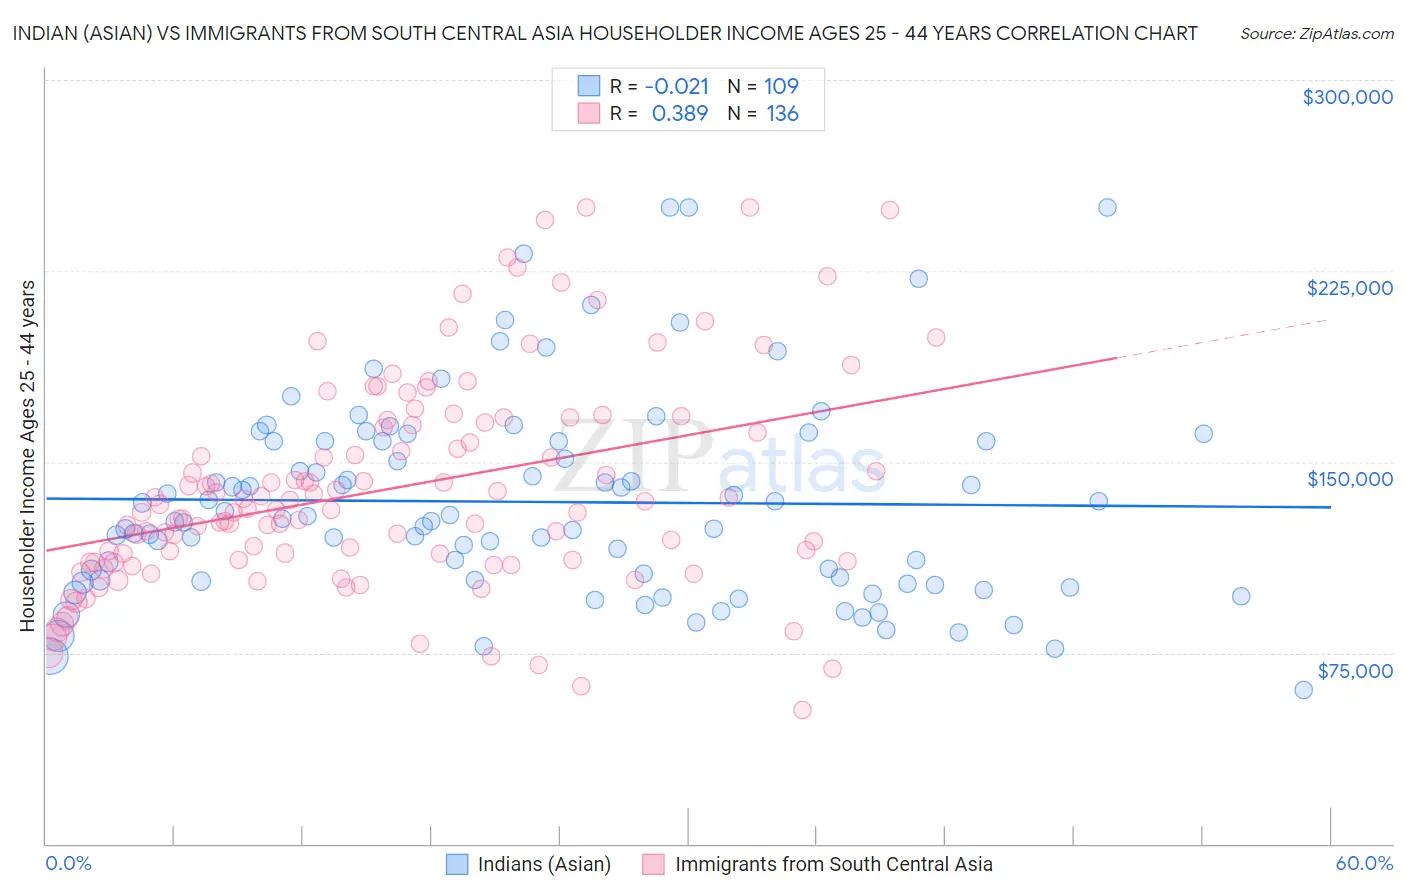 Indian (Asian) vs Immigrants from South Central Asia Householder Income Ages 25 - 44 years